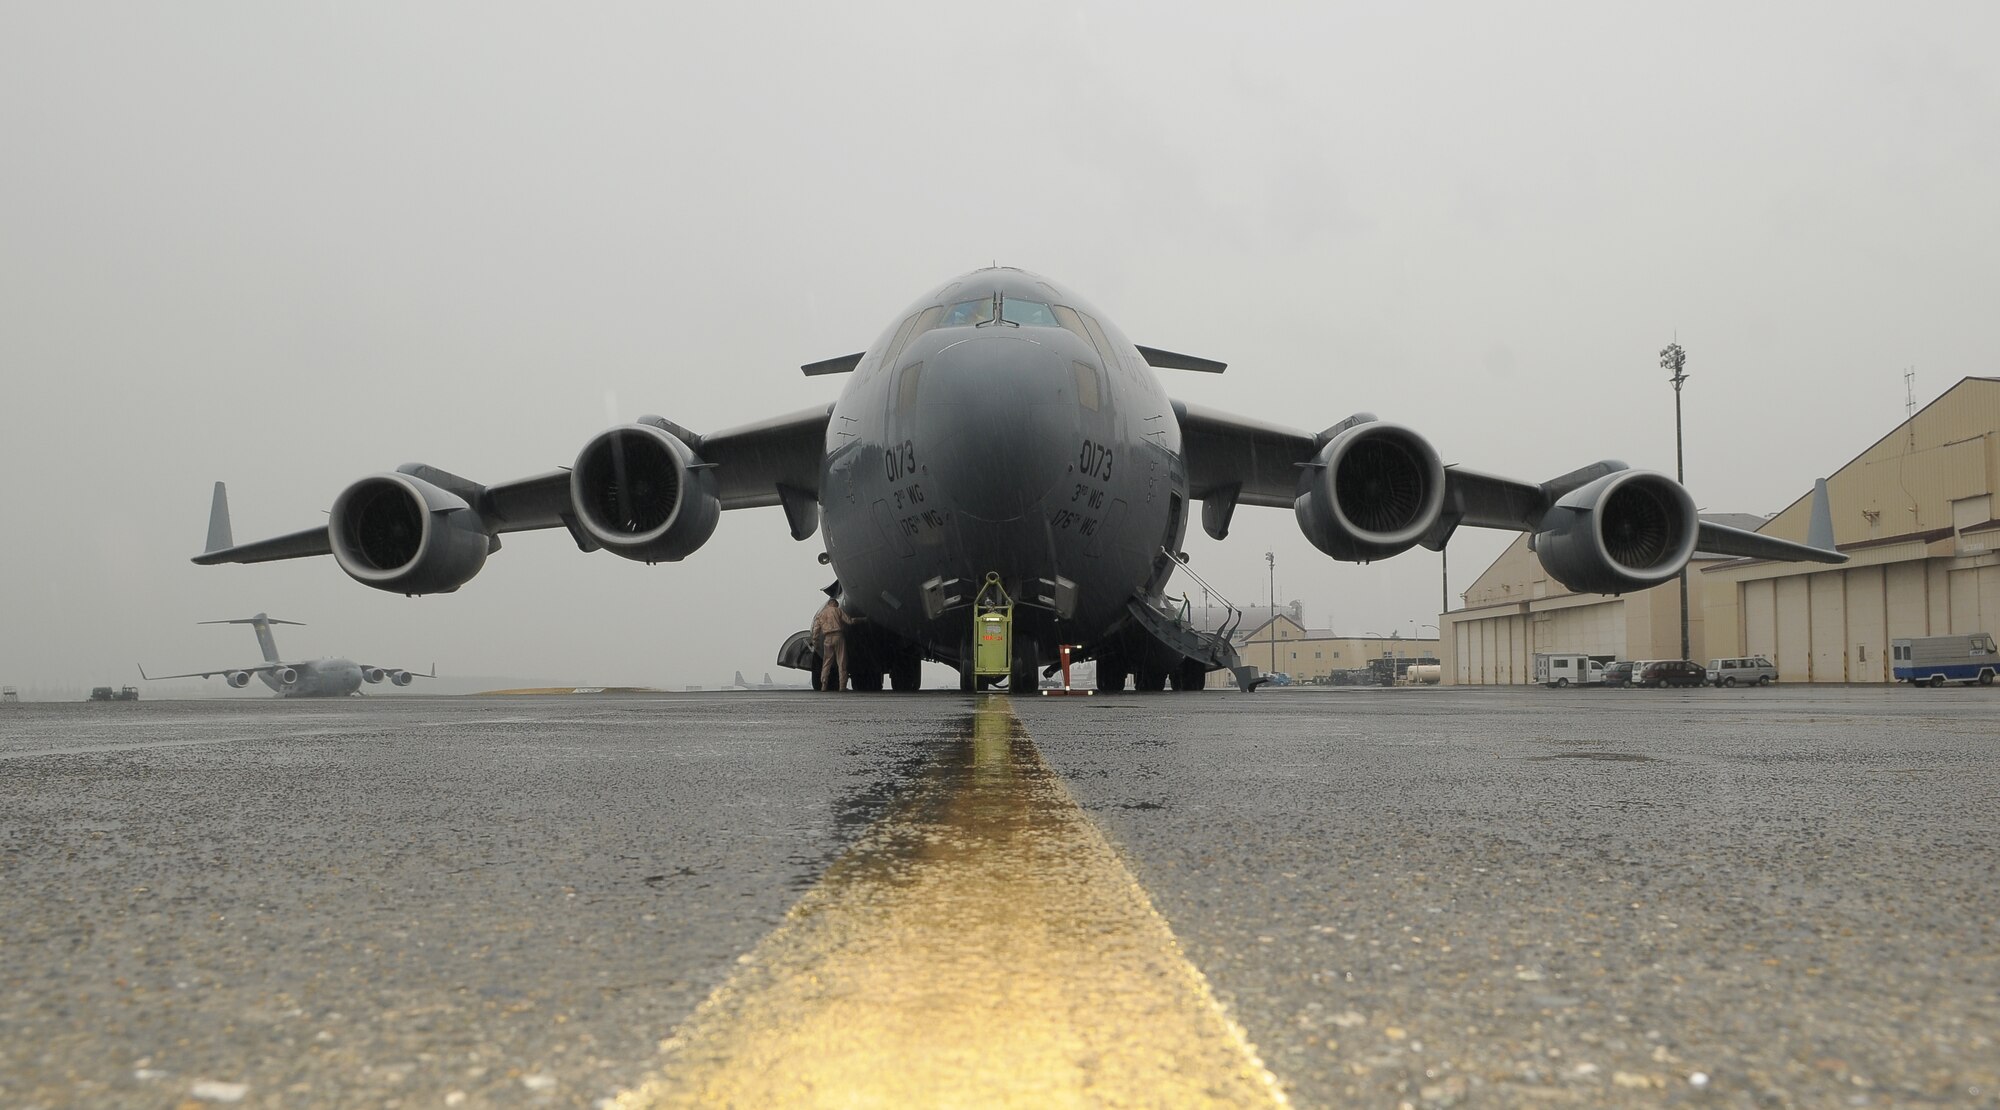 YOKOTA AIR BASE, Japan -- A C-17 Globemaster III from Elmendorf Air Force Base, Alaska, waits to take off Oct. 5 on a mission to transport 26 members of an Air Force Humanitarian Assistance Rapid Response Team and a seven-person mobile field surgical team en route to Padang, Indonesia, to provide medical care to those affected by the recent 7.6-magnitude earthquake. The crew from Elmendorf transported the team and the equipment necessary to support the team, which is self-sustaining for up to five days. (U.S. Air Force photo/Airman 1st Class Sean Martin)